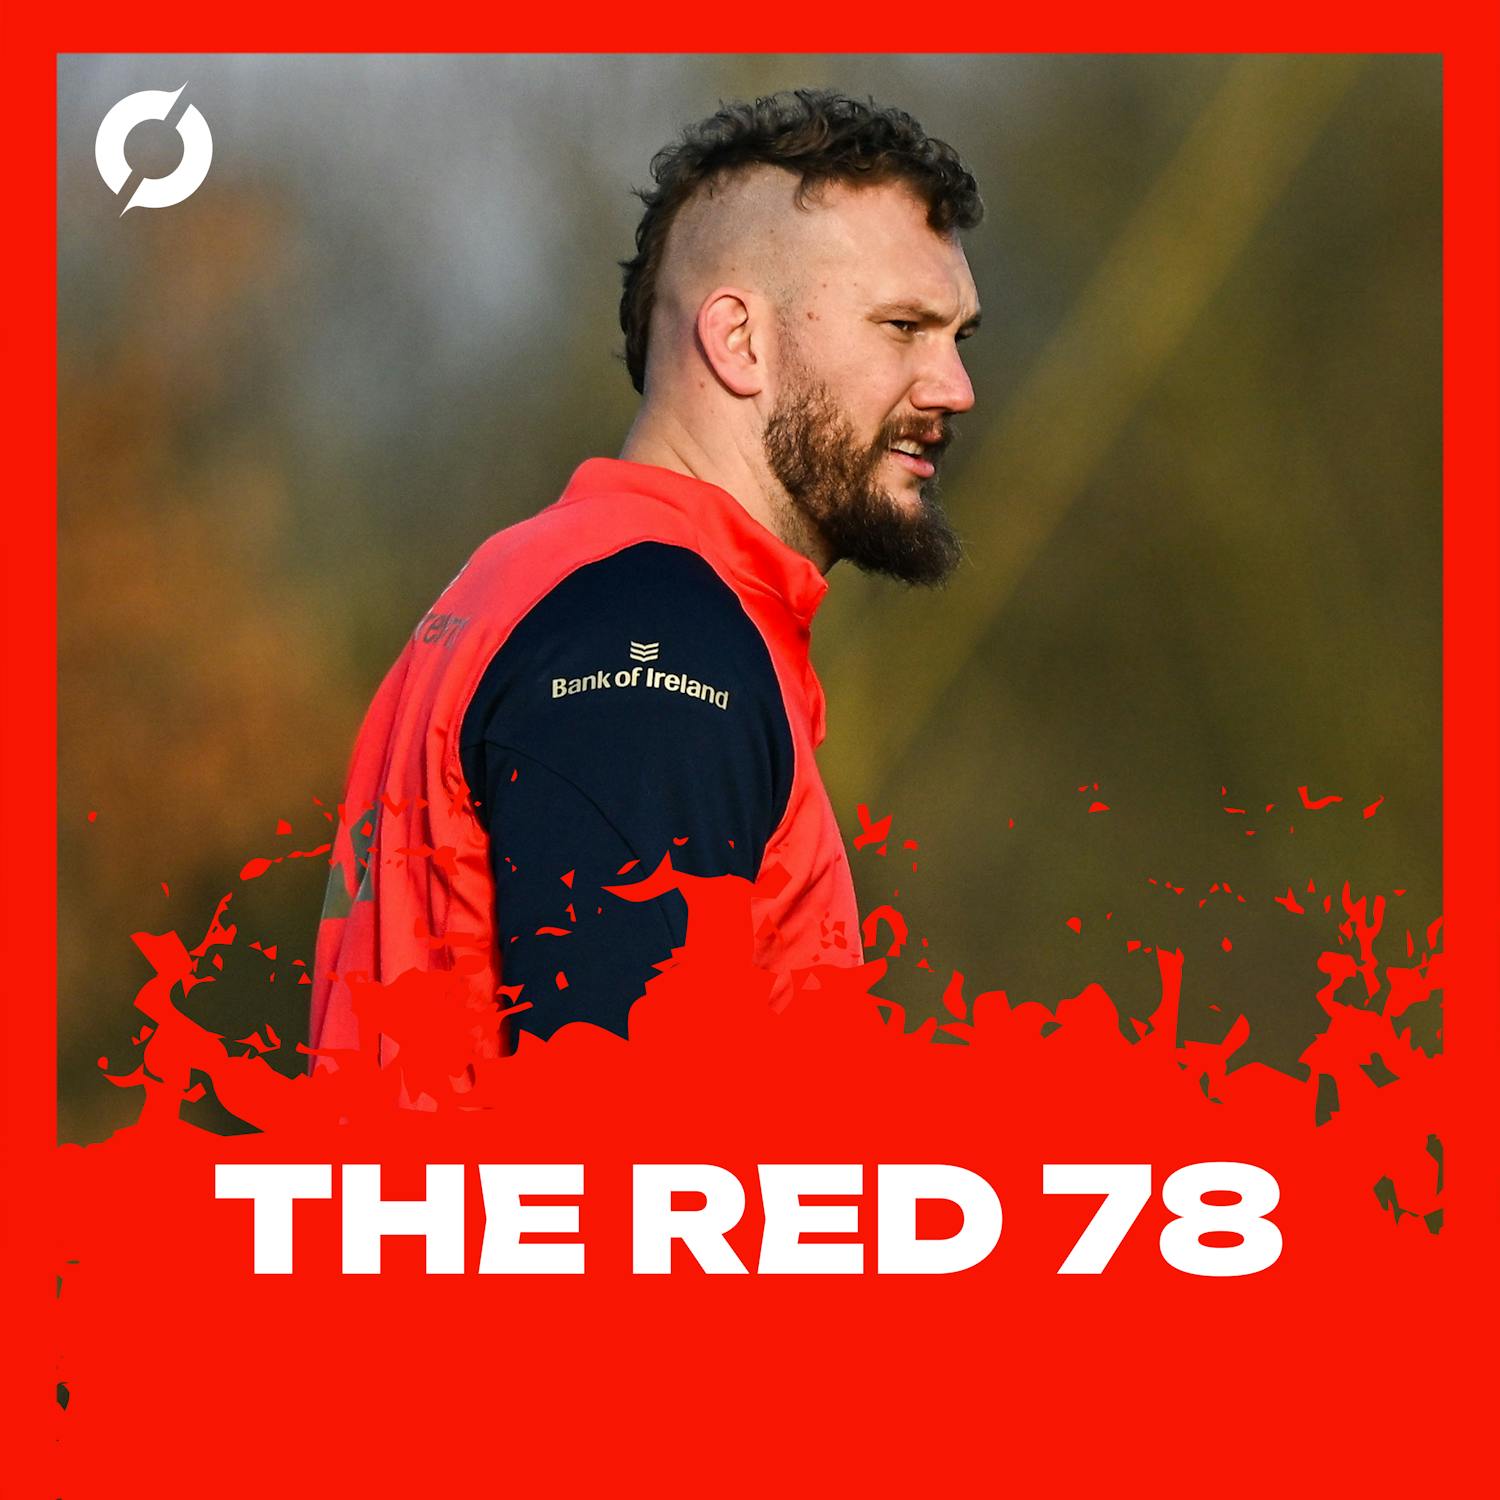 The Red 78 Unlocked: Reds see off Zebre in Cork, Haley impresses and big games ahead Ep.89